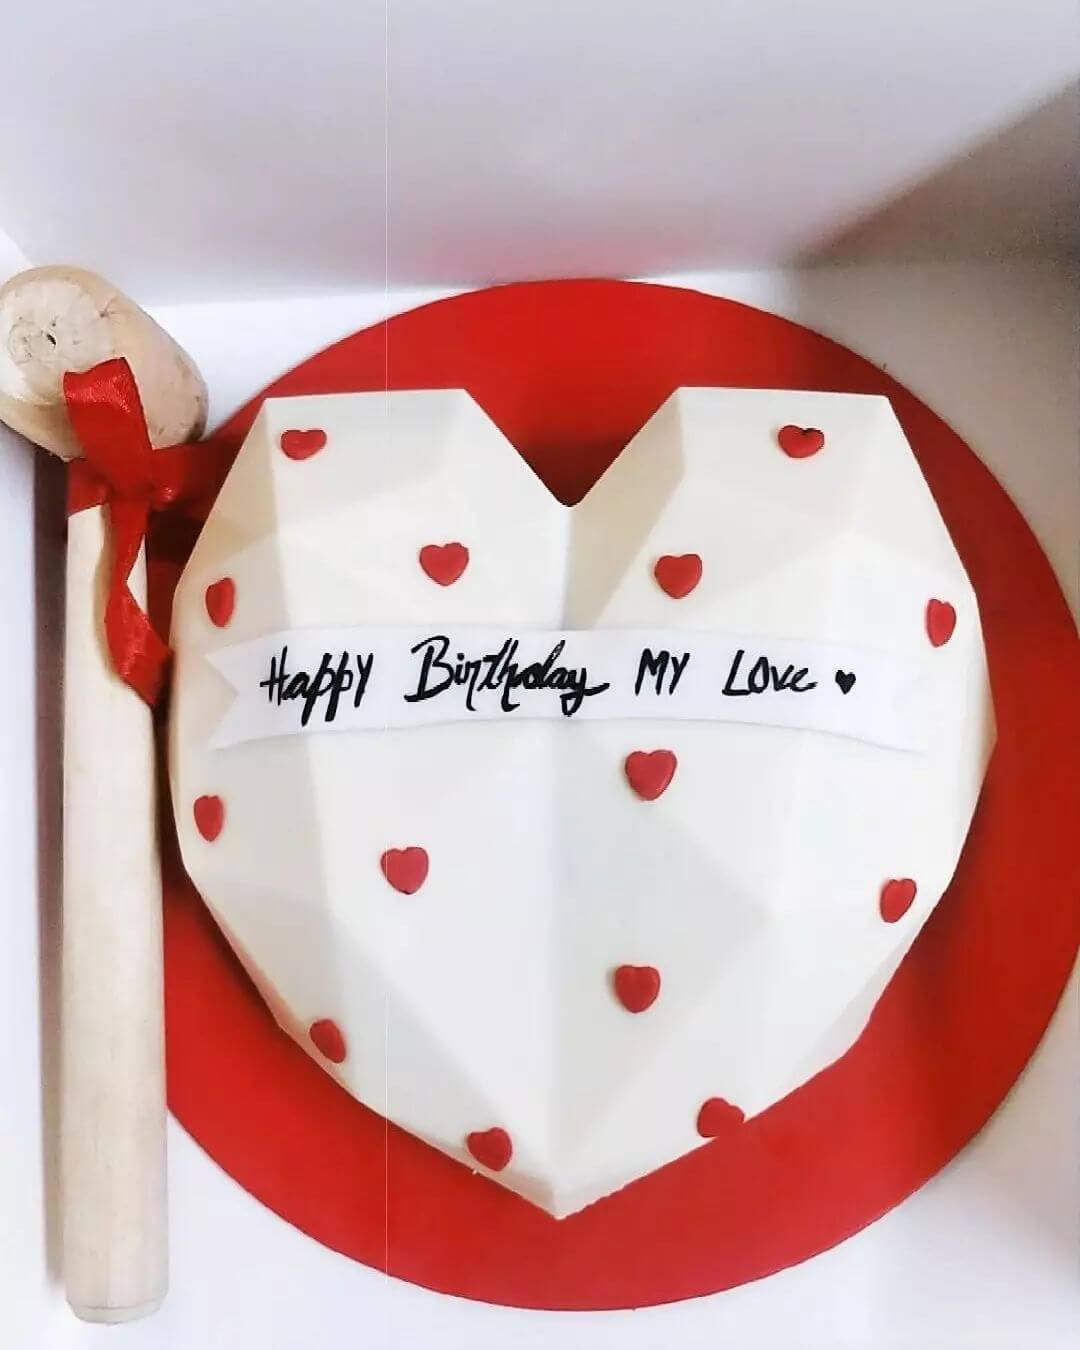 Romantic Anniversary Cake Delivery in Delhi NCR - ₹1,249.00 Cake Express